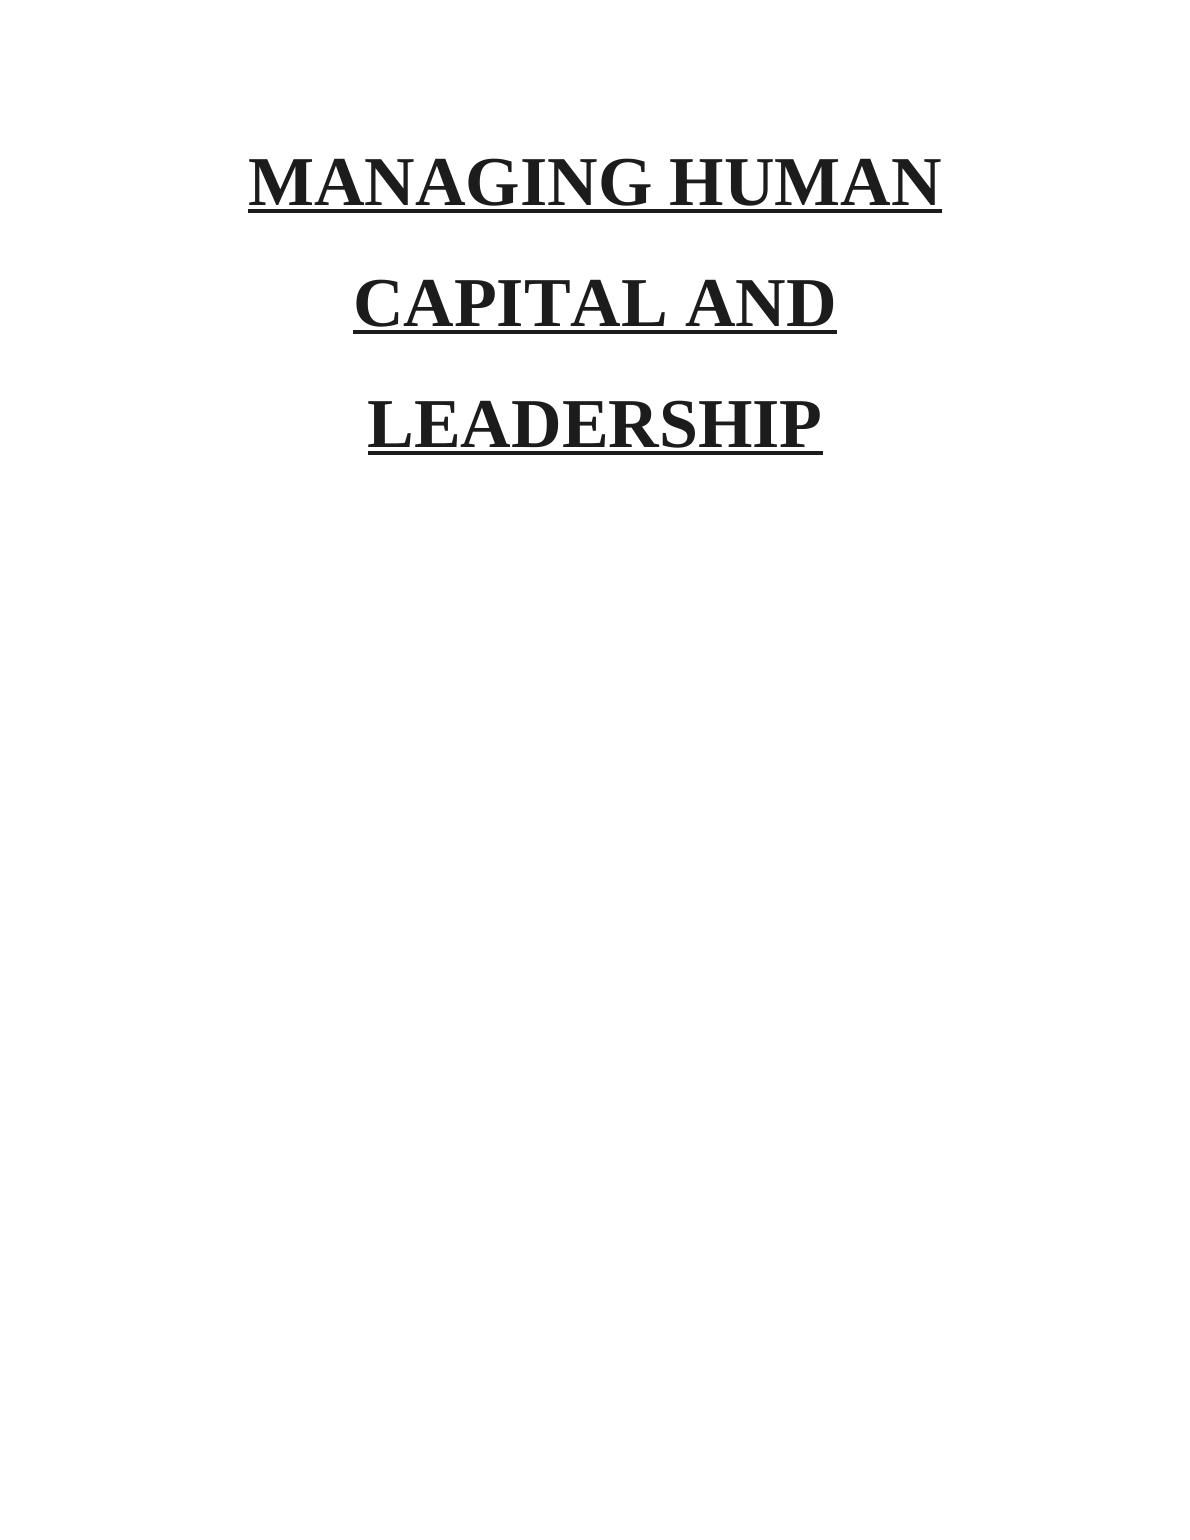 Managing Human Capital and Leadership Assignment_1